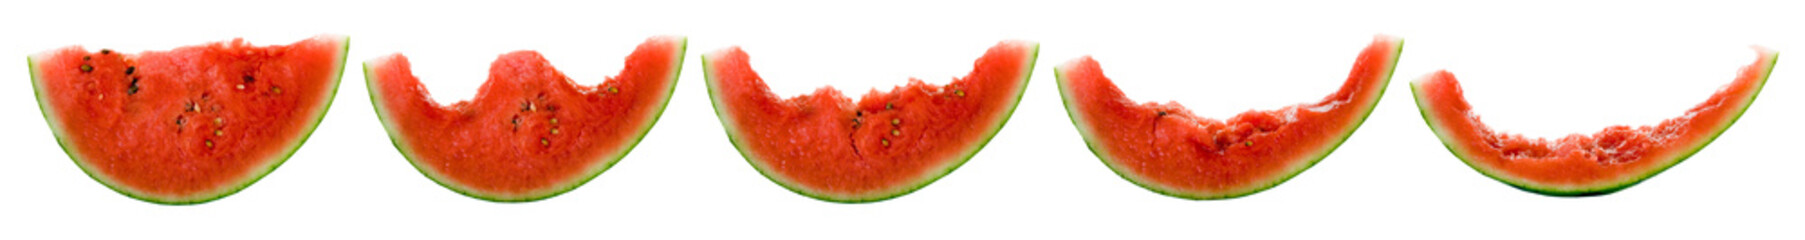 Tasty Ripe Watermelon Portions On Isolated White Background